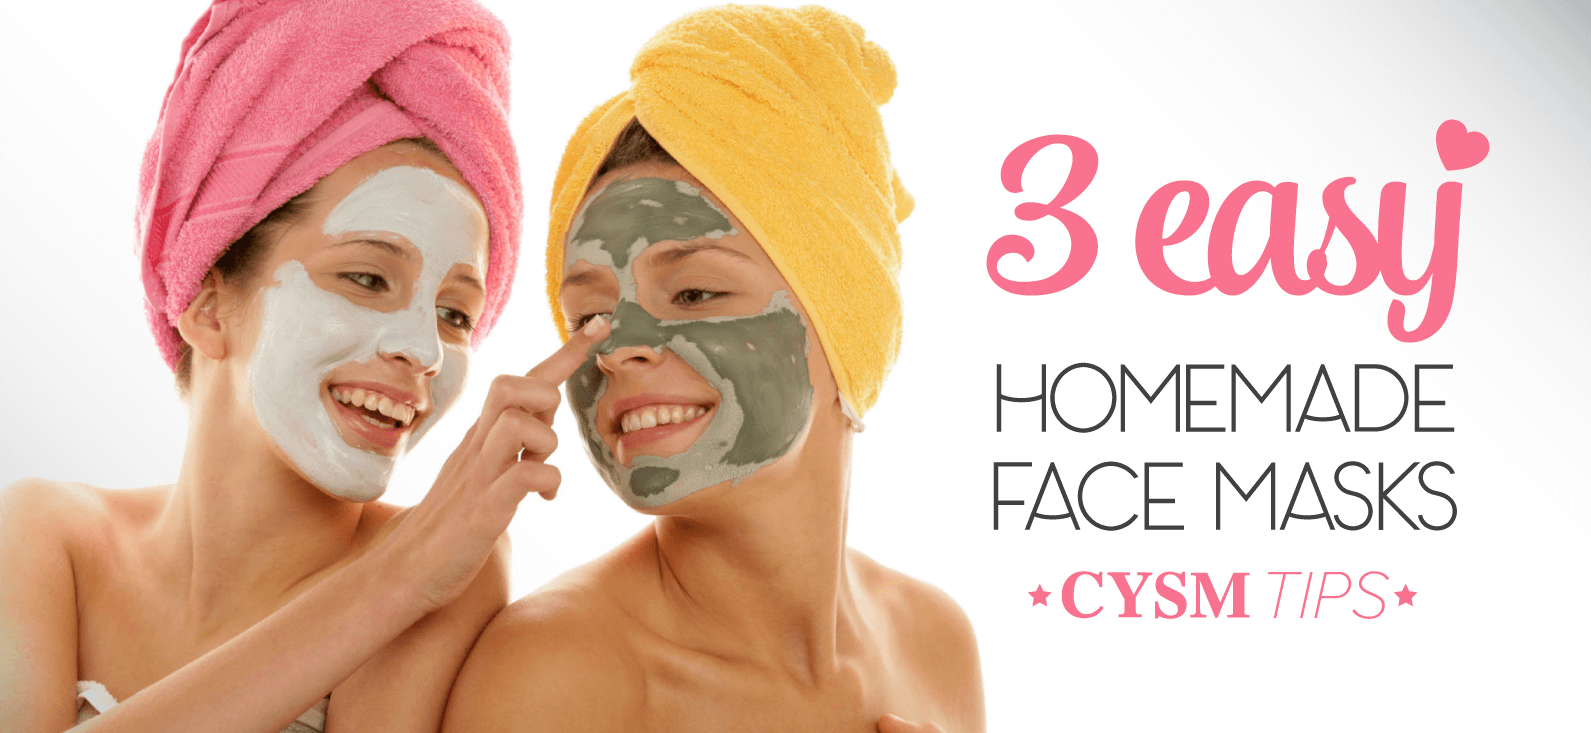 3 easy homemade face masks, get the perfect skin by CYSM